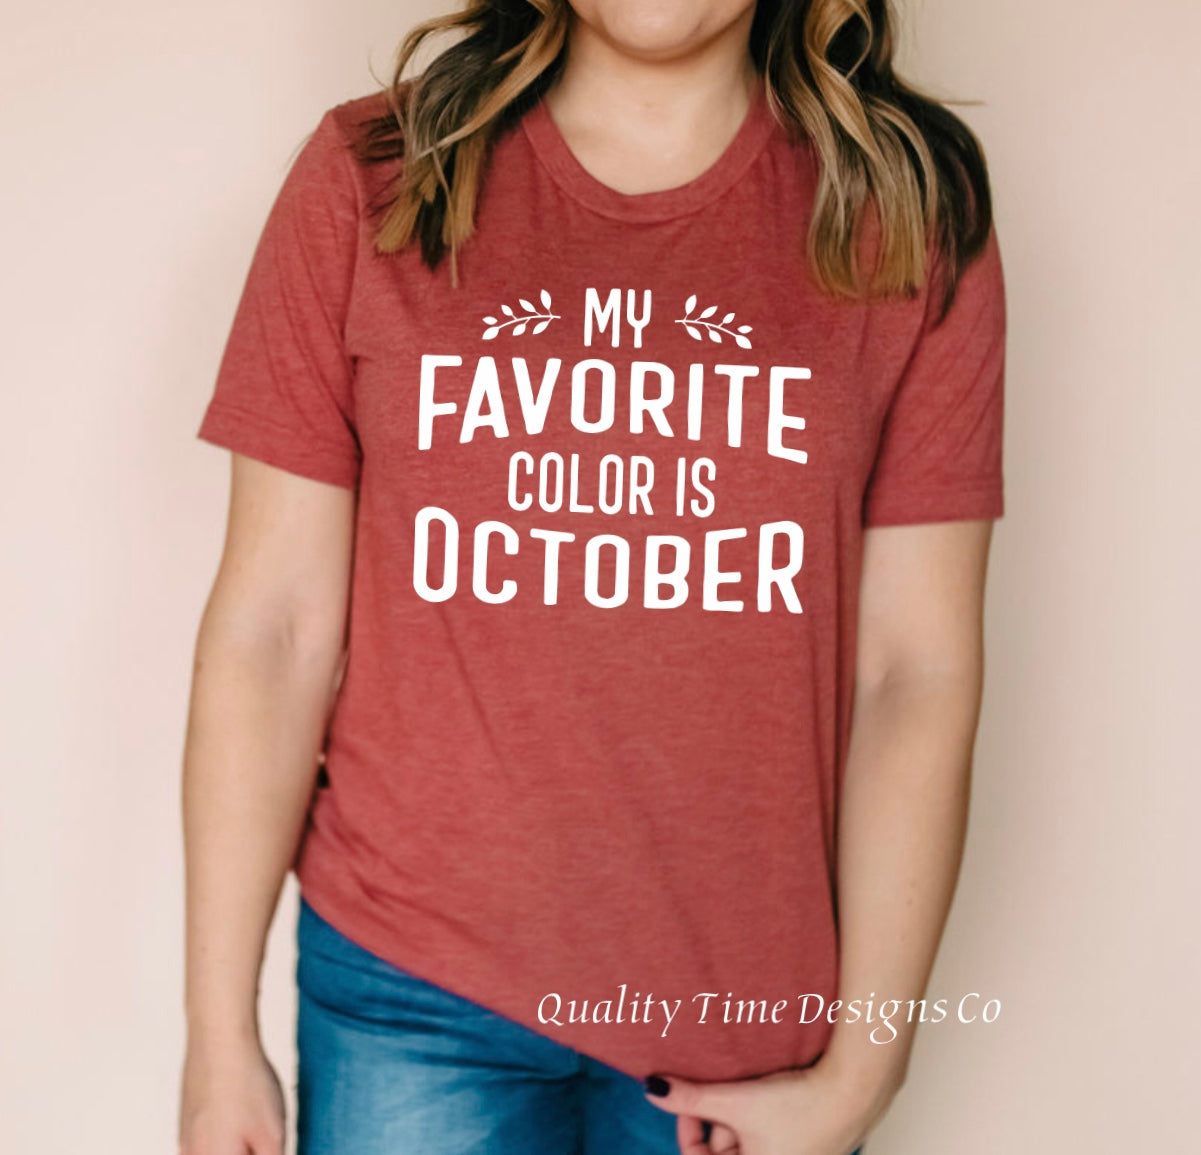 My favorite color is October t-shirt 